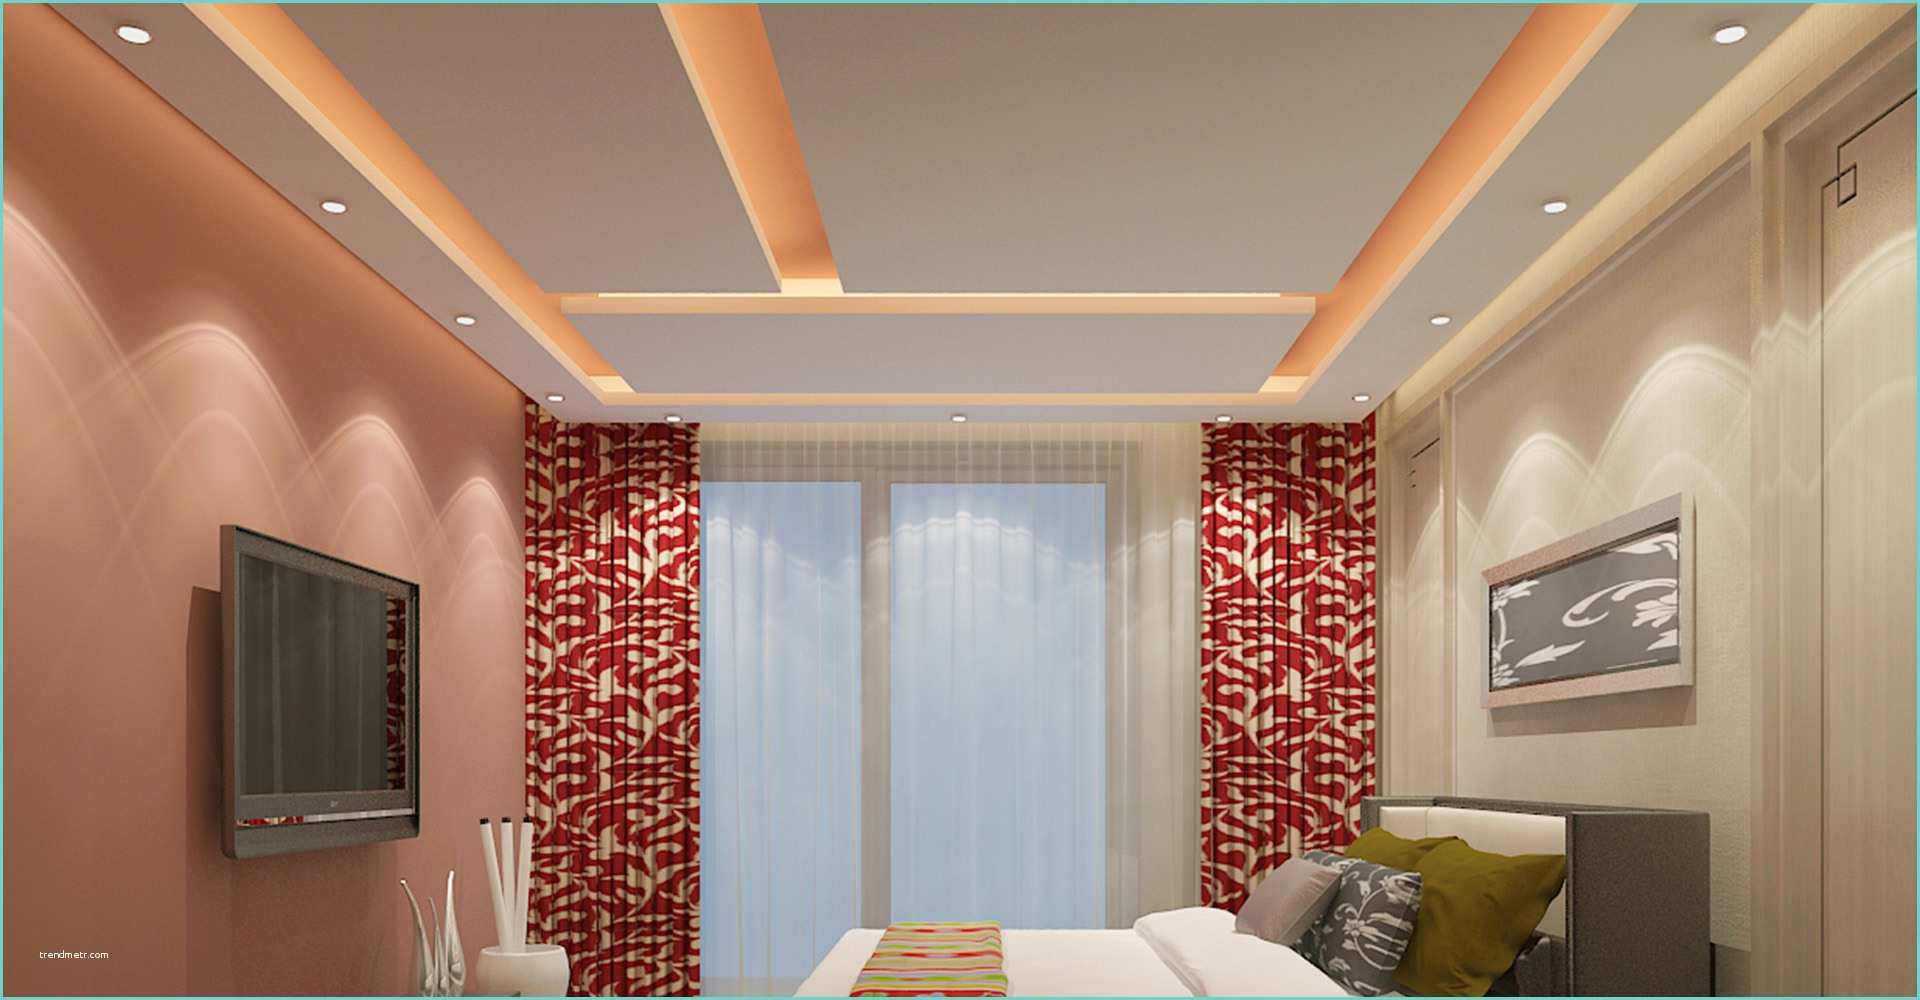 Pop Designs for Ceiling Residential Building Down Ceiling Design In India